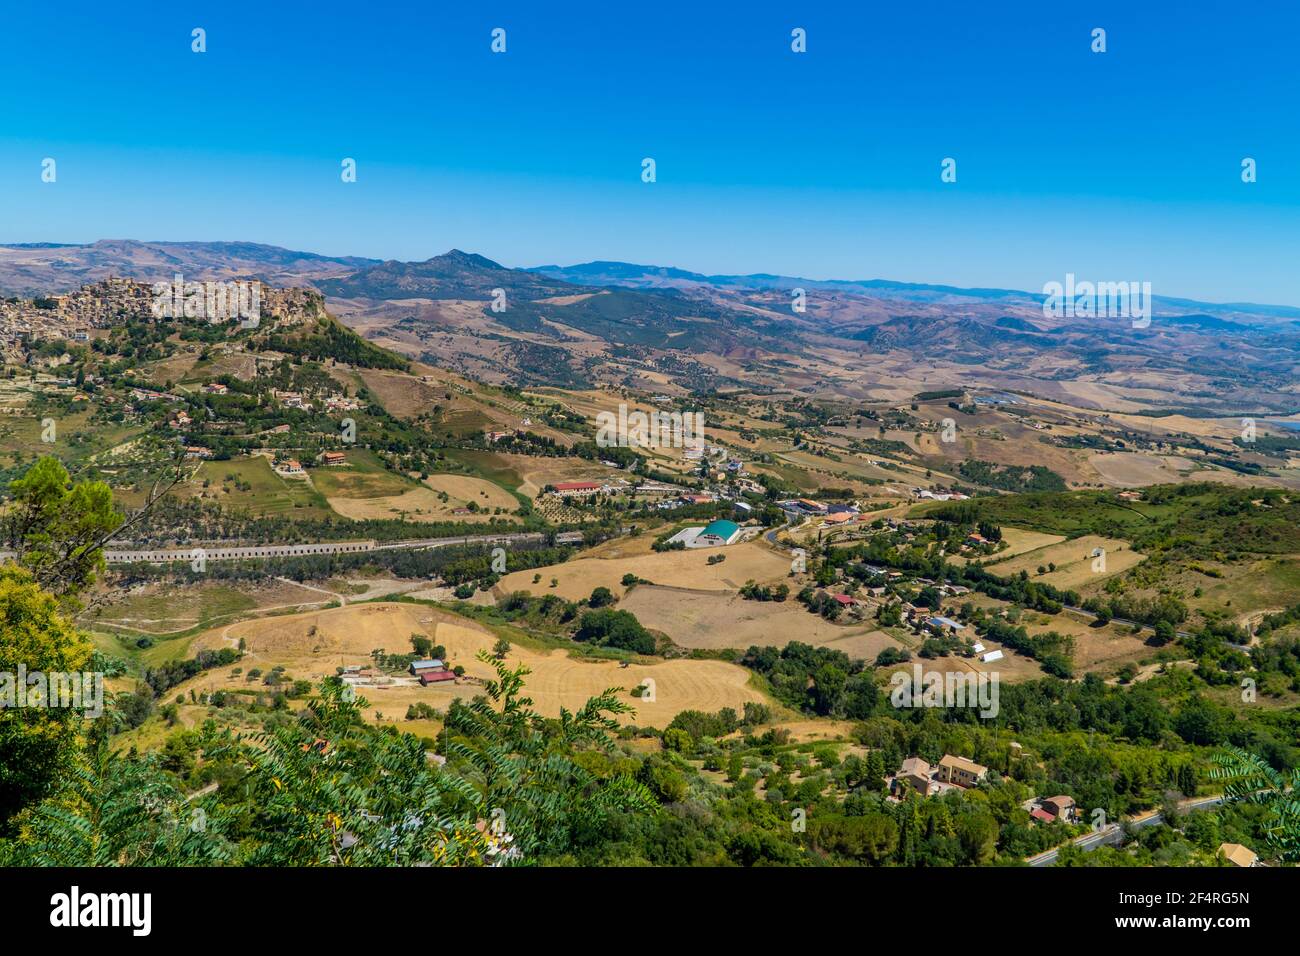 The landscapes of central Sicily, Italy with villages and the town of Leonforte on the hill Stock Photo